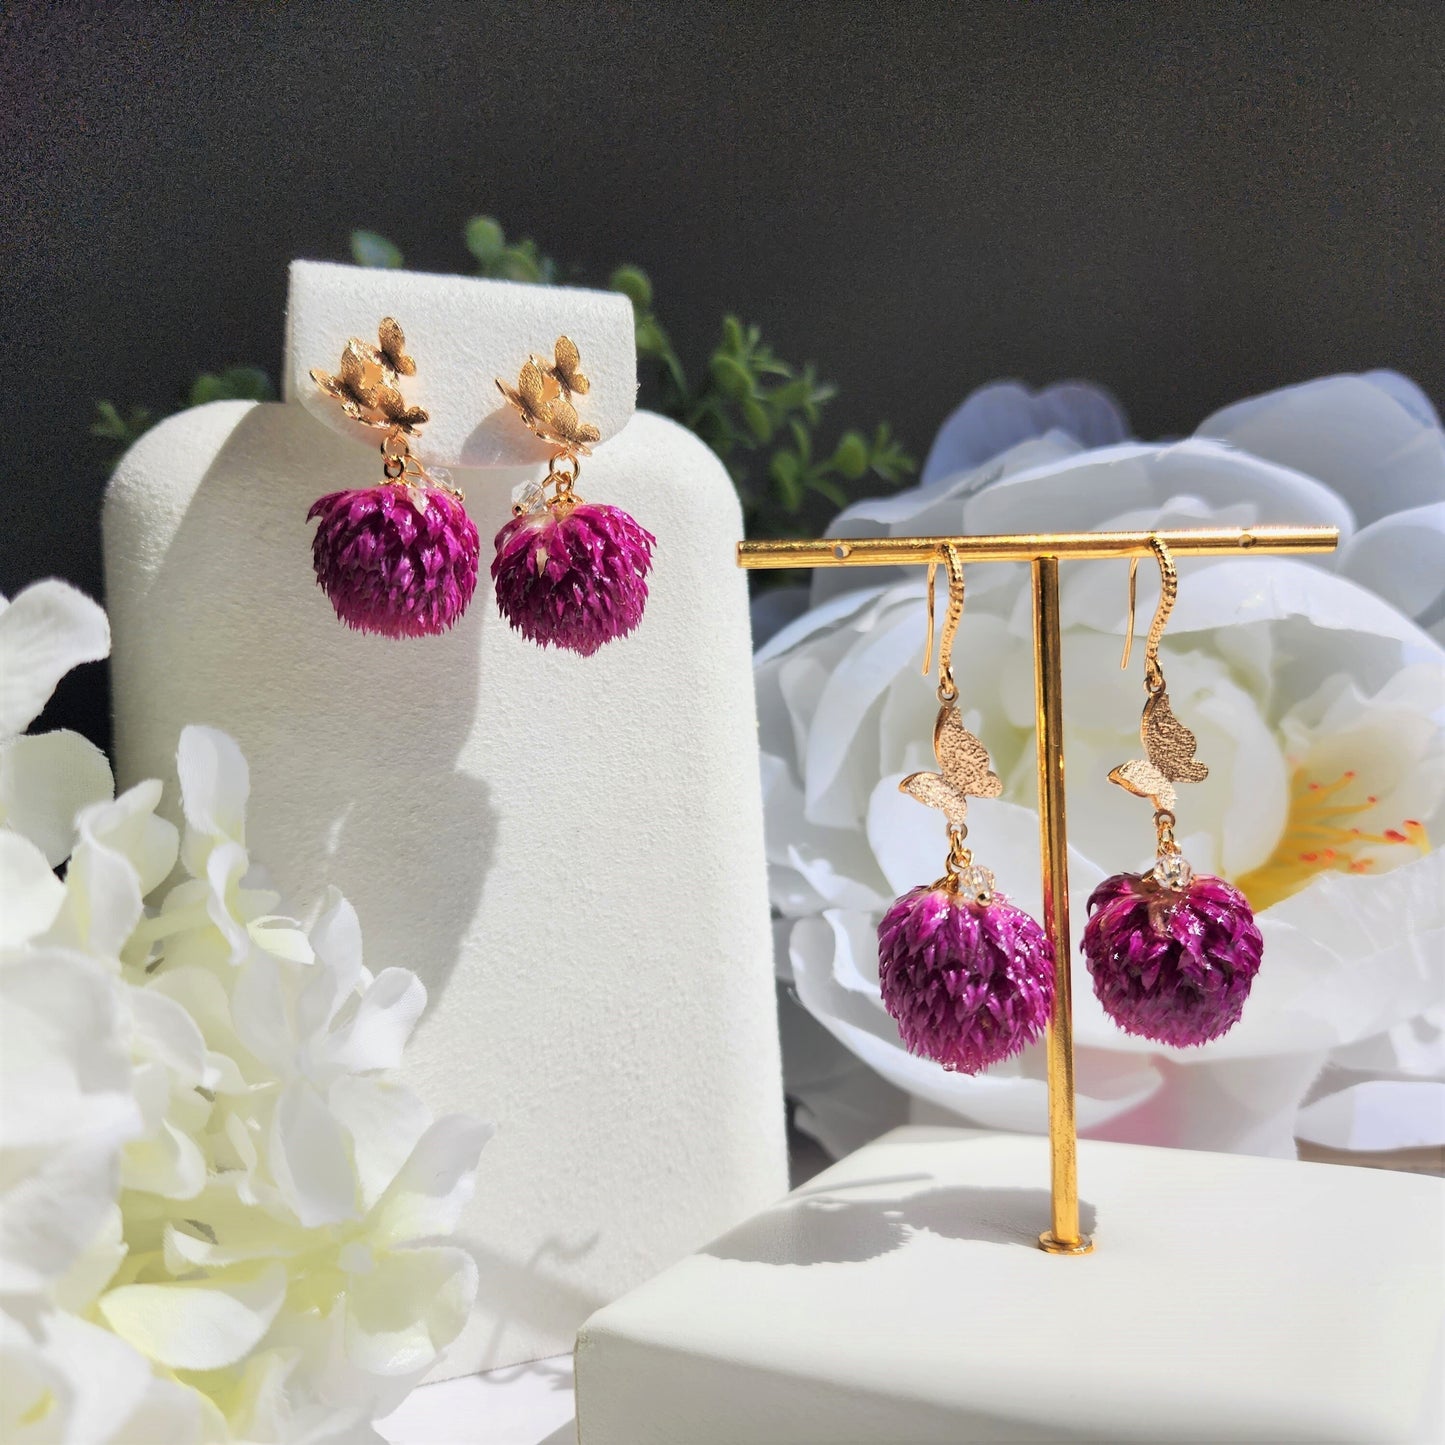 Thousand Day Red flower earrings, Botanical earrings, Real globe Amaranth flower earrings, gift for her